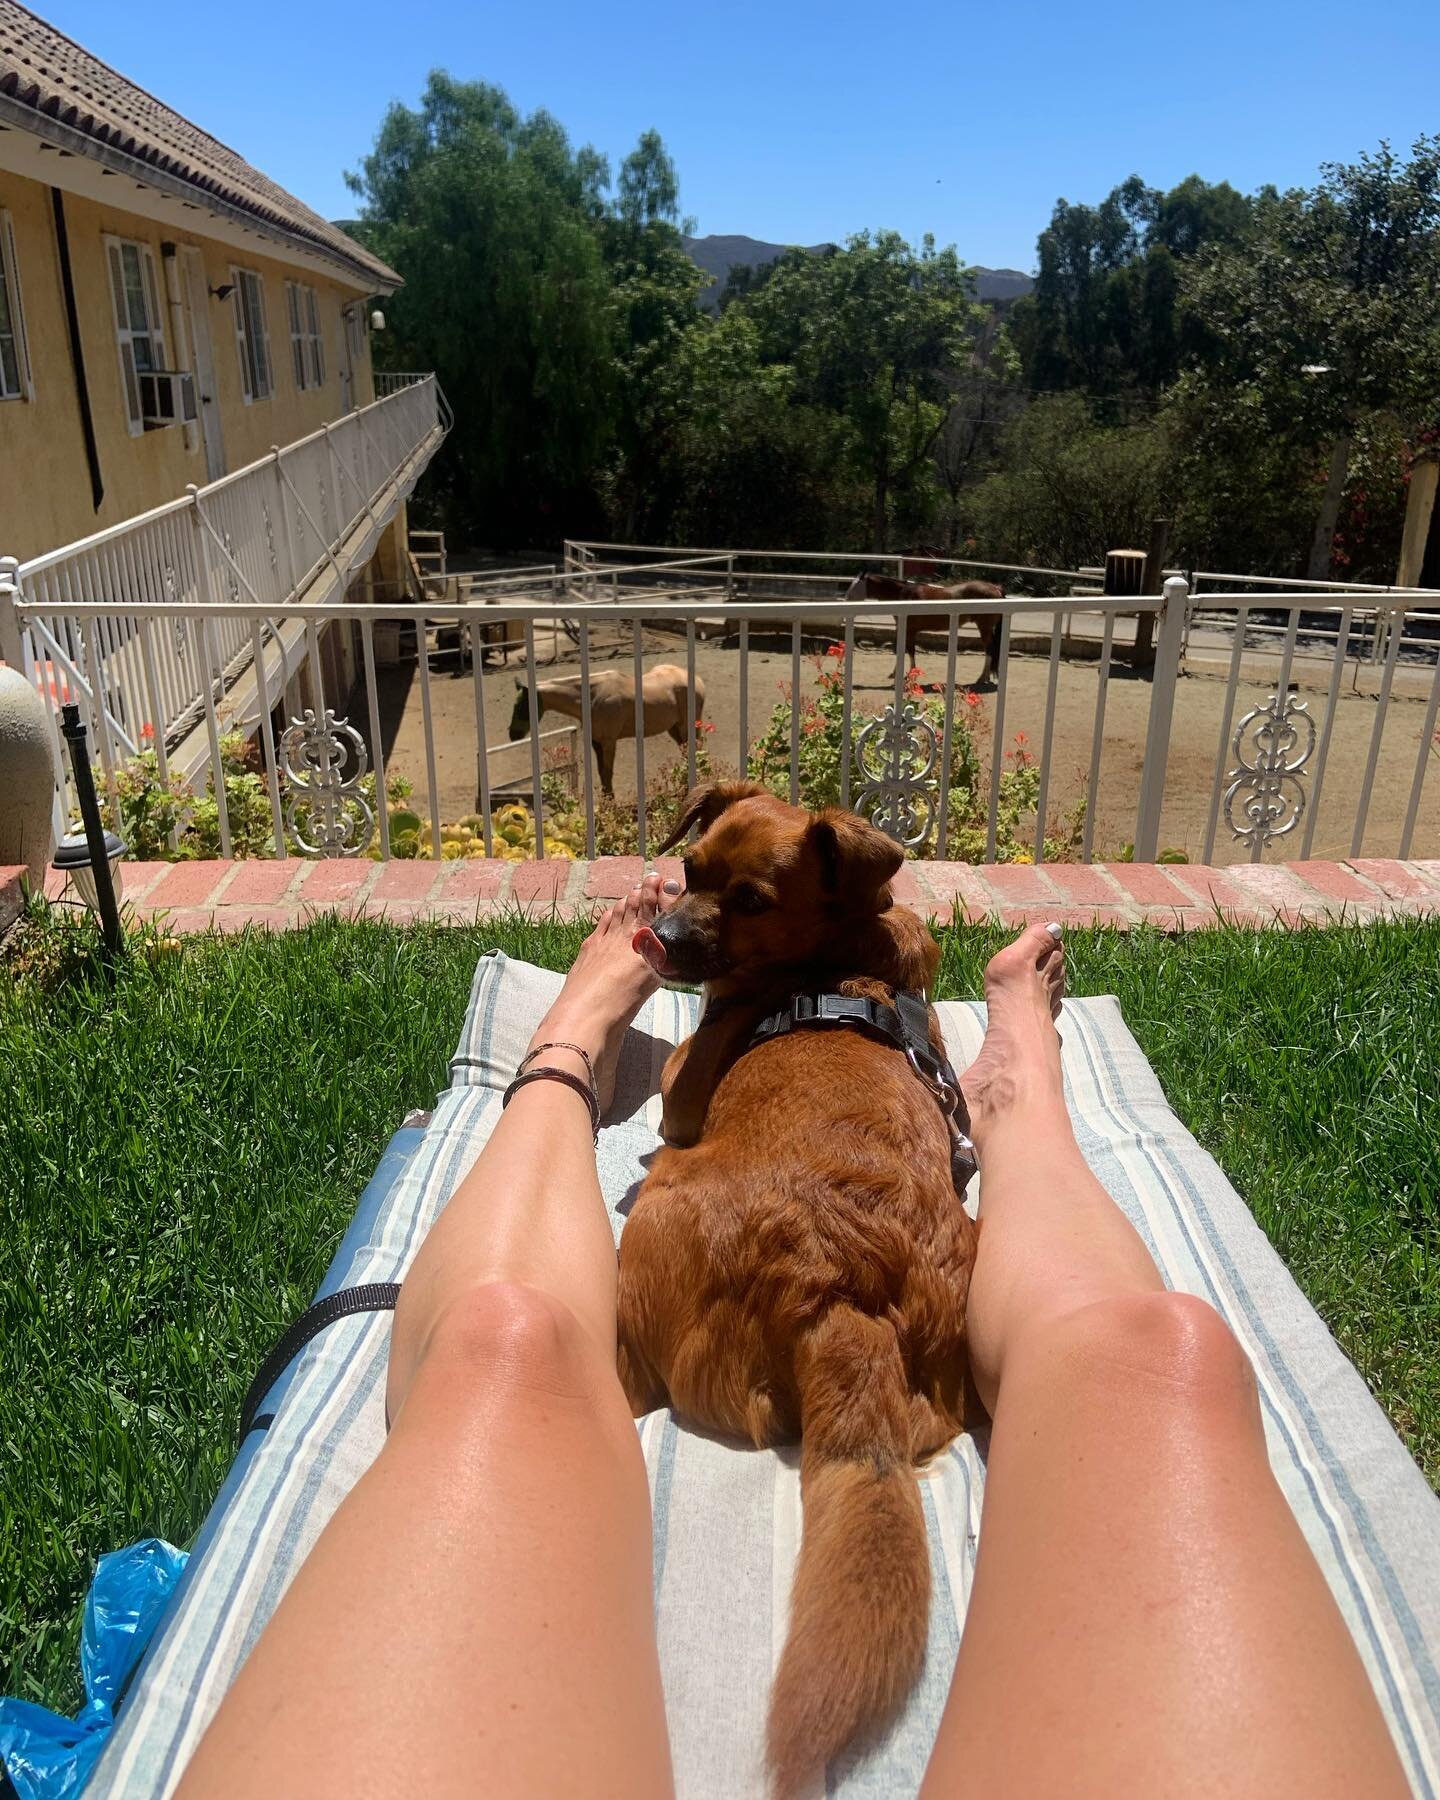 Grateful for a weekend away in Malibu with my best bud &amp; lots of sunshine.&hearts;️ He loved meeting all the horses🐴 &amp; in deep gratitude for the opportunity to study reiki with @shannonmariahsosebee ✨🤲🏽✨

#malibu #horses #reiki #puppylove 